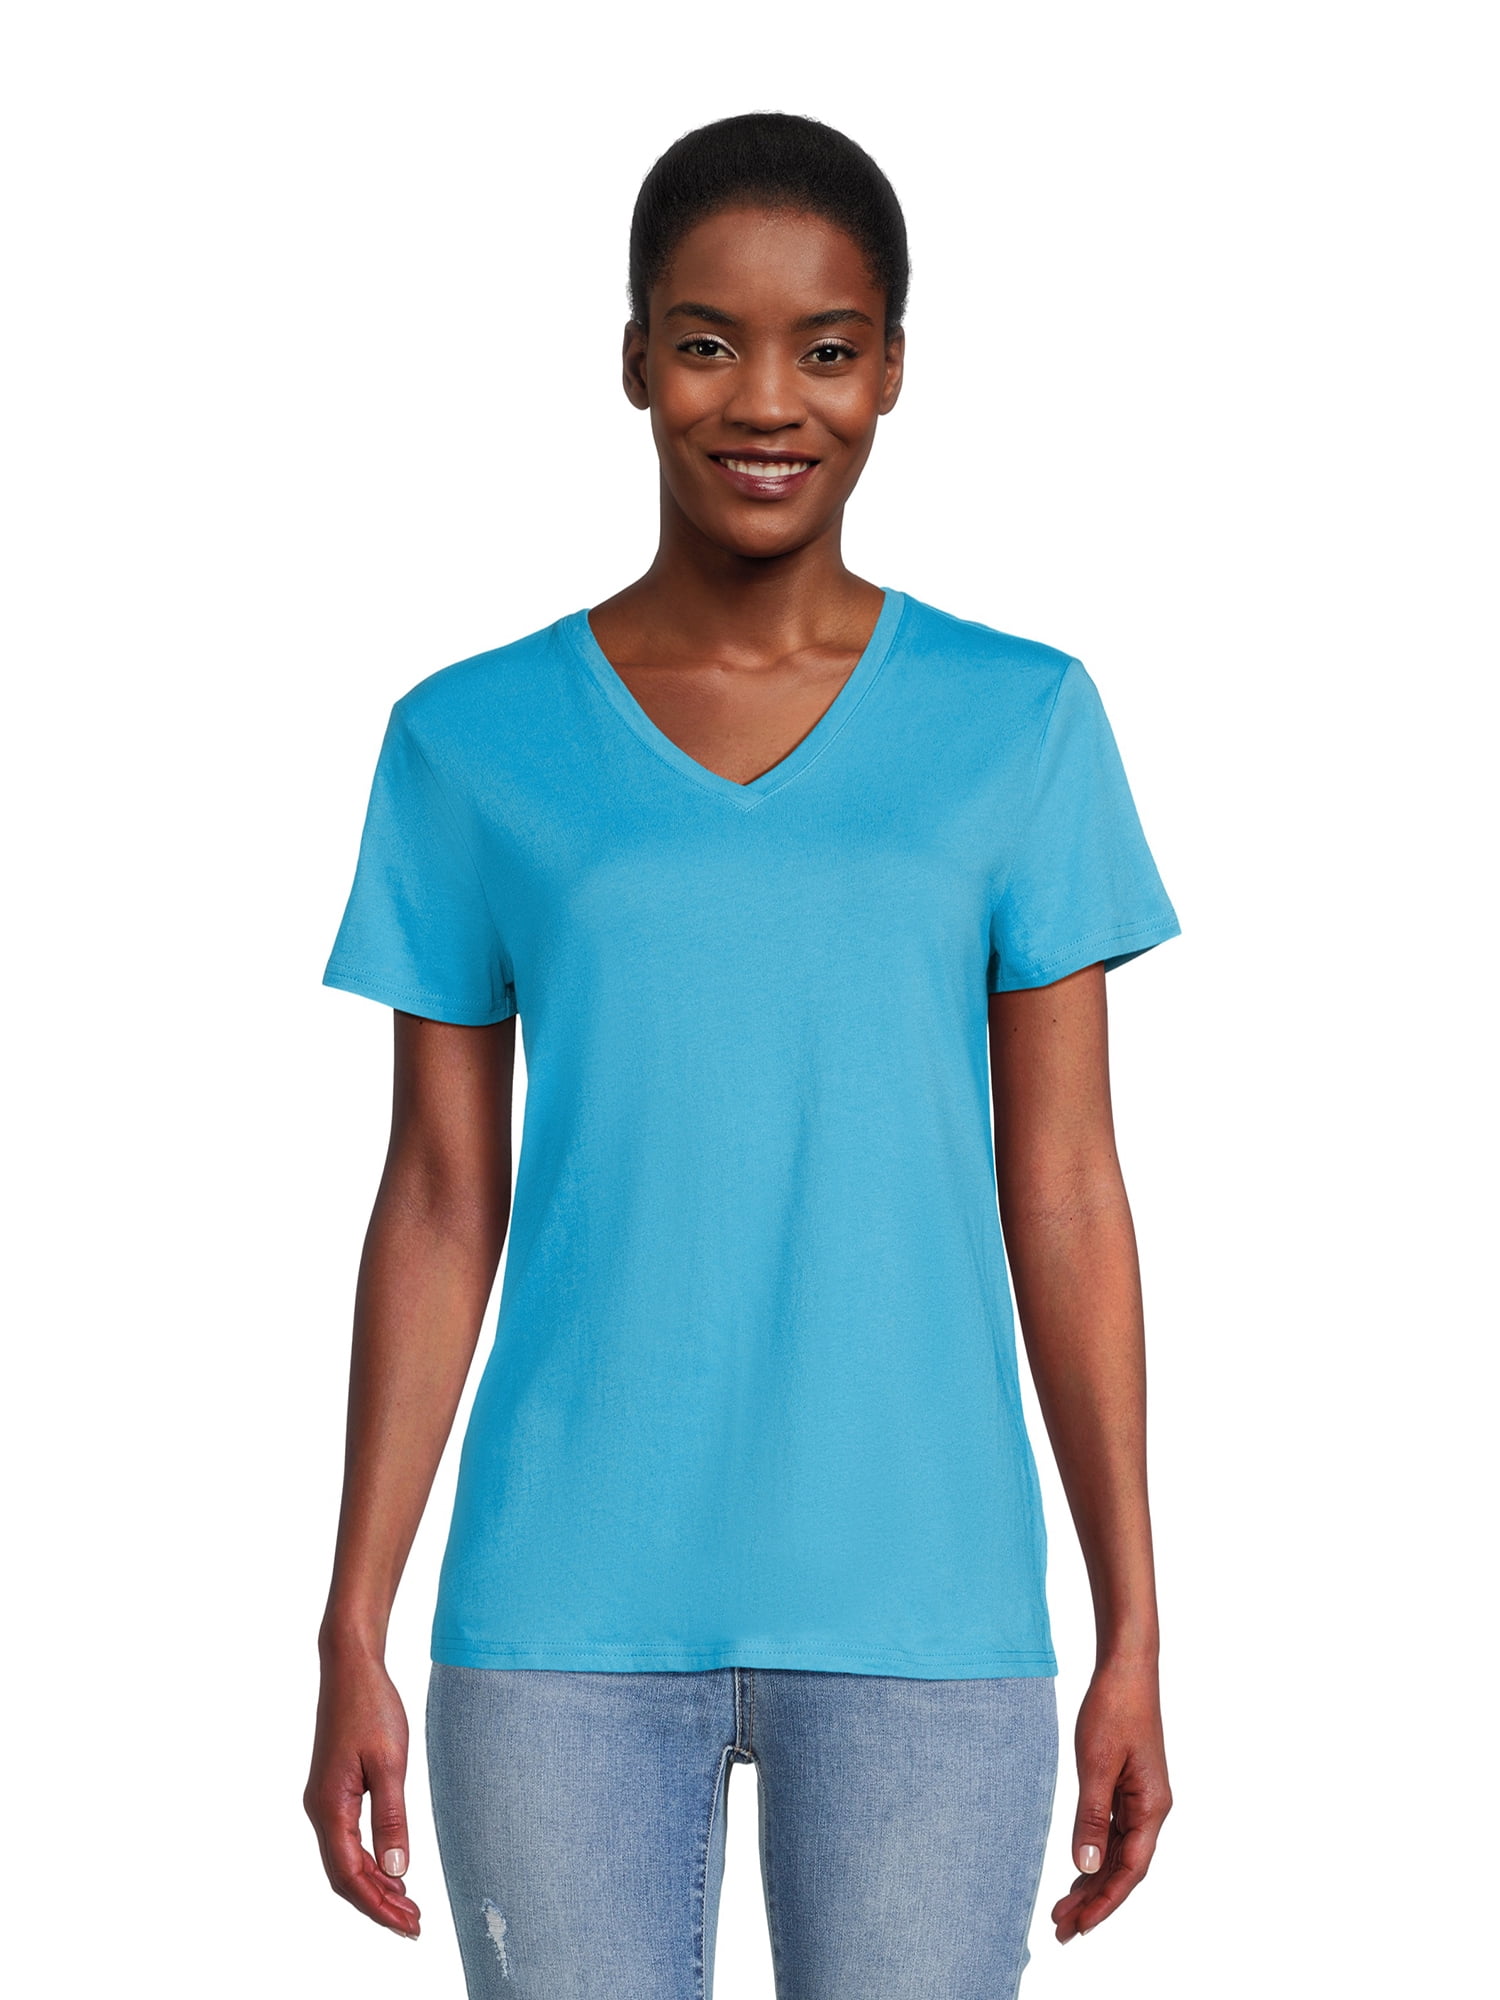 Hanes Originals Women's Lightweight V-Neck Cotton Tee with Long Sleeves,  Sizes XS-XXL 